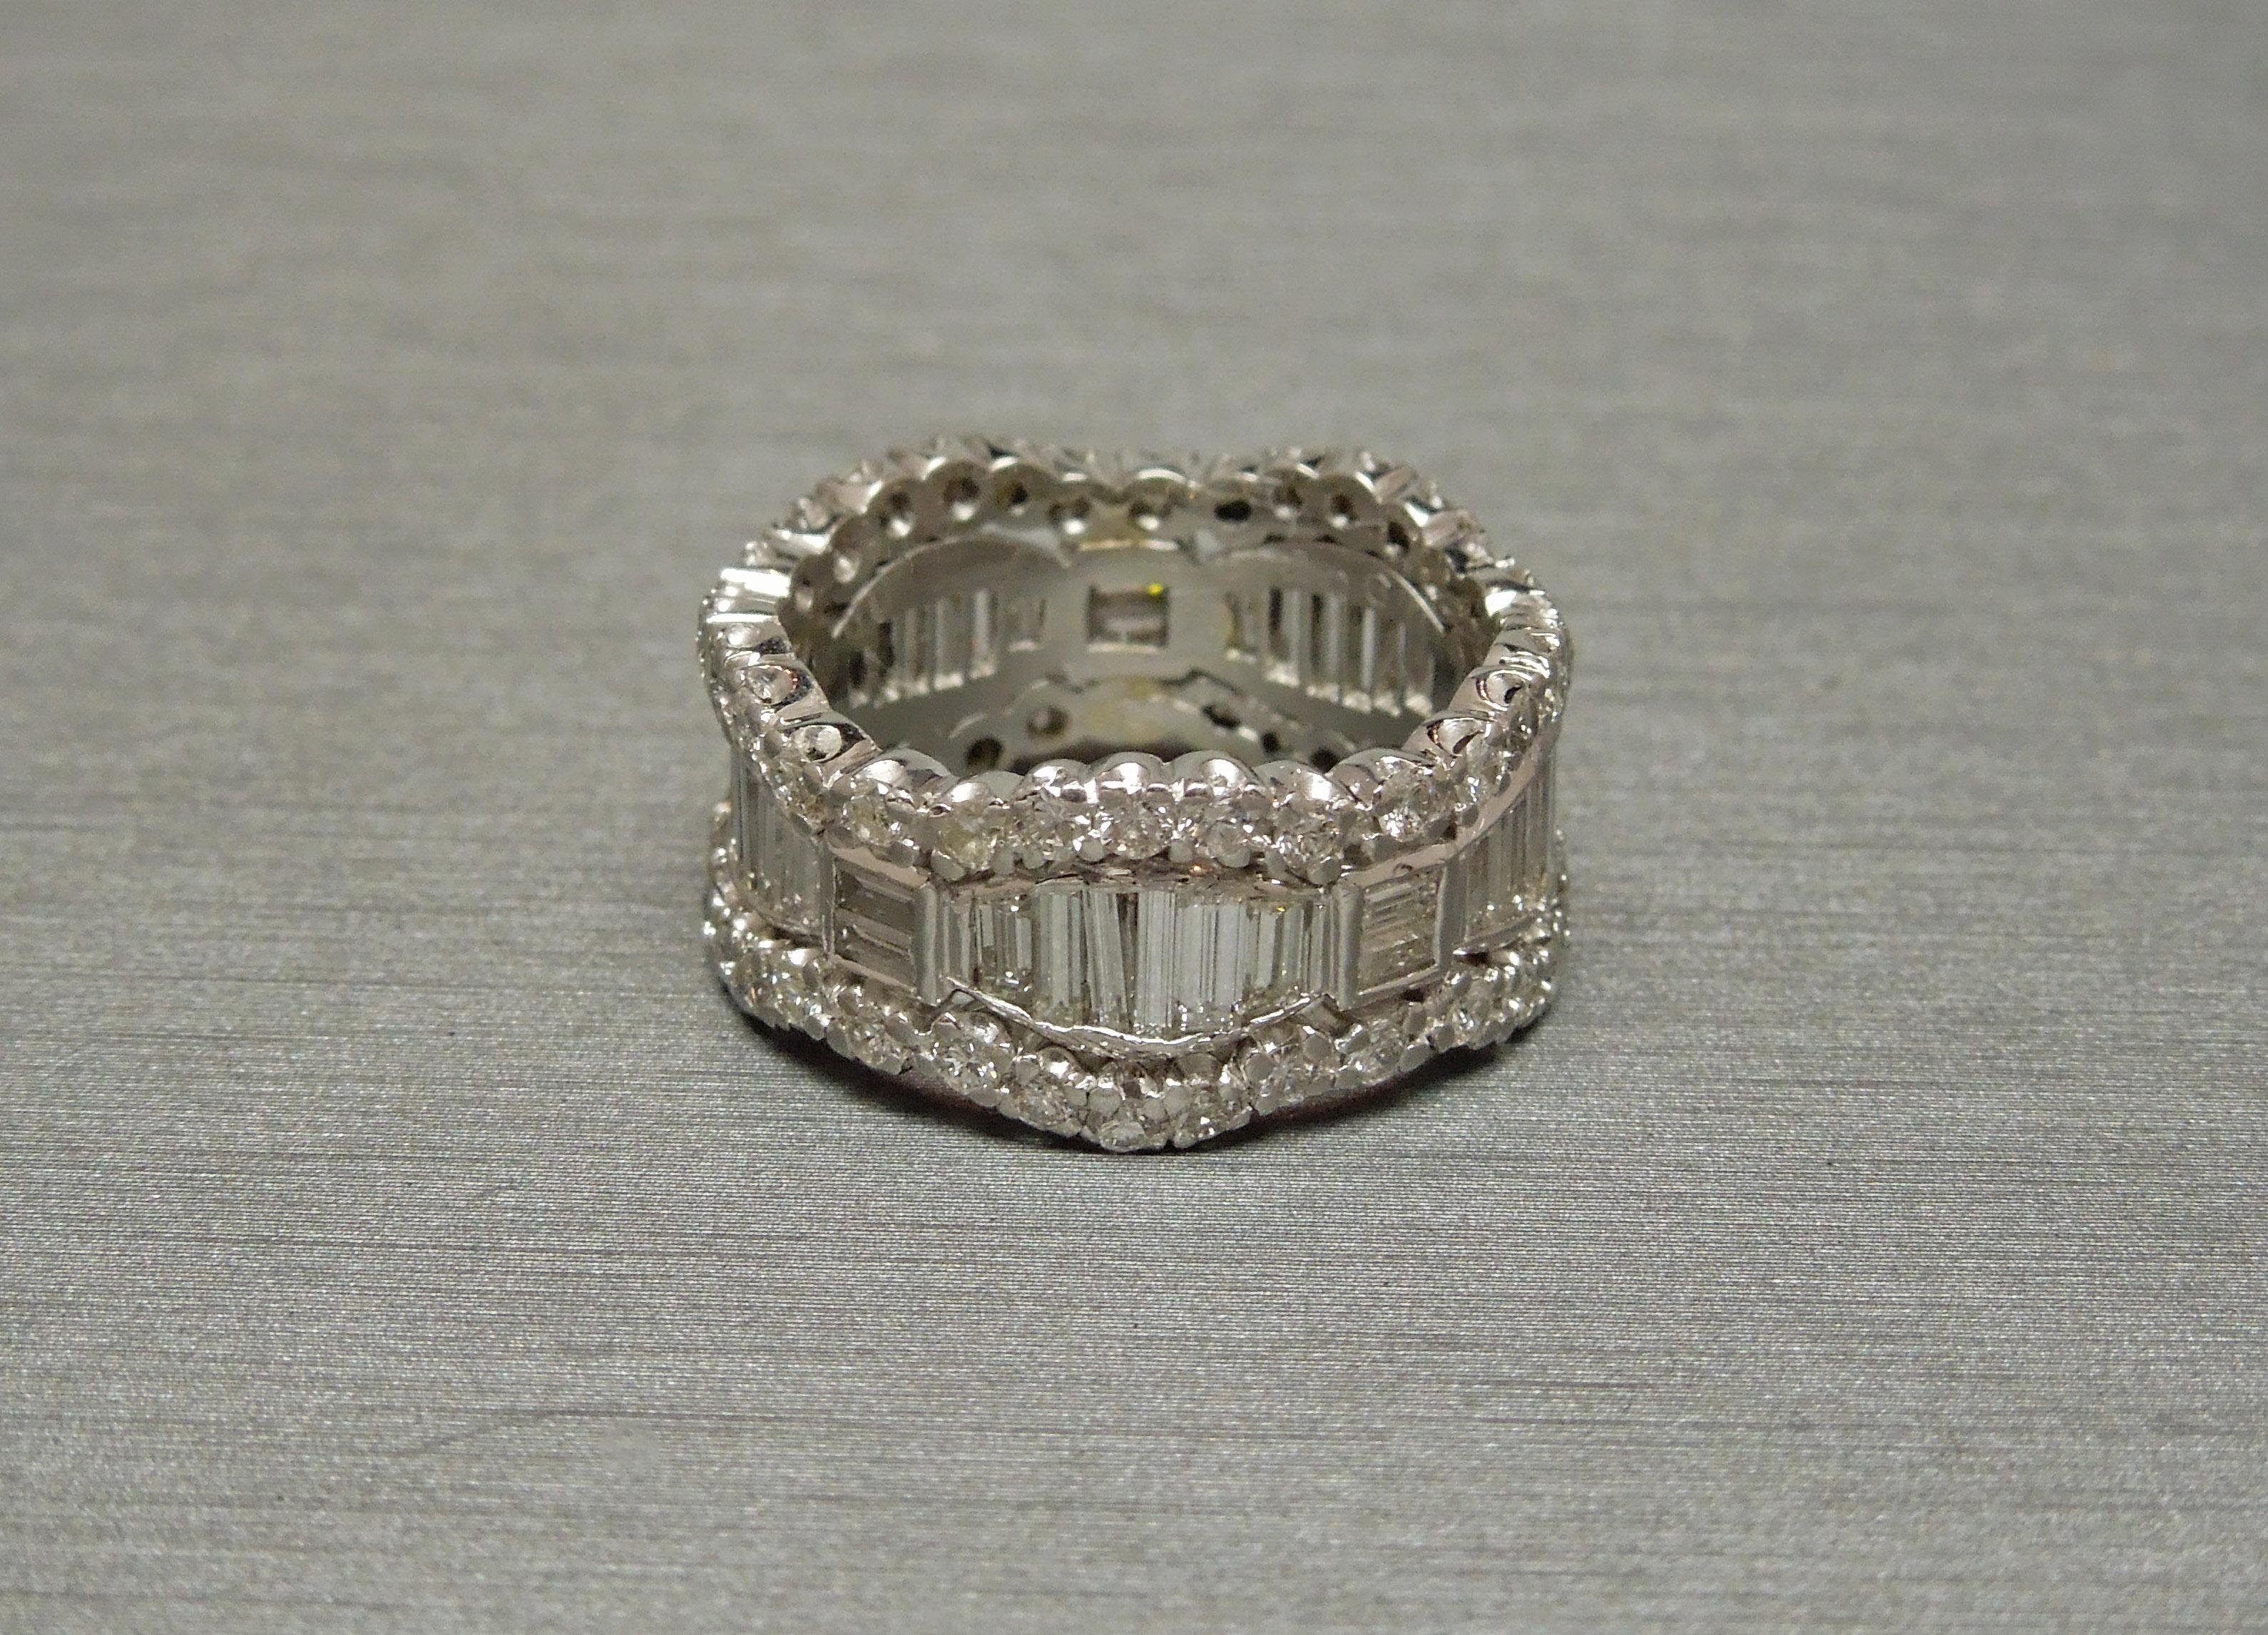 This Midcentury Triple Row Diamond Eternity Band was constructed in a Tiara-inspired pattern - The Crown being a symbol of Loyalty and Love in addition to the eternity design, symbolizing eternal Love.
Containing a central row of Graduating